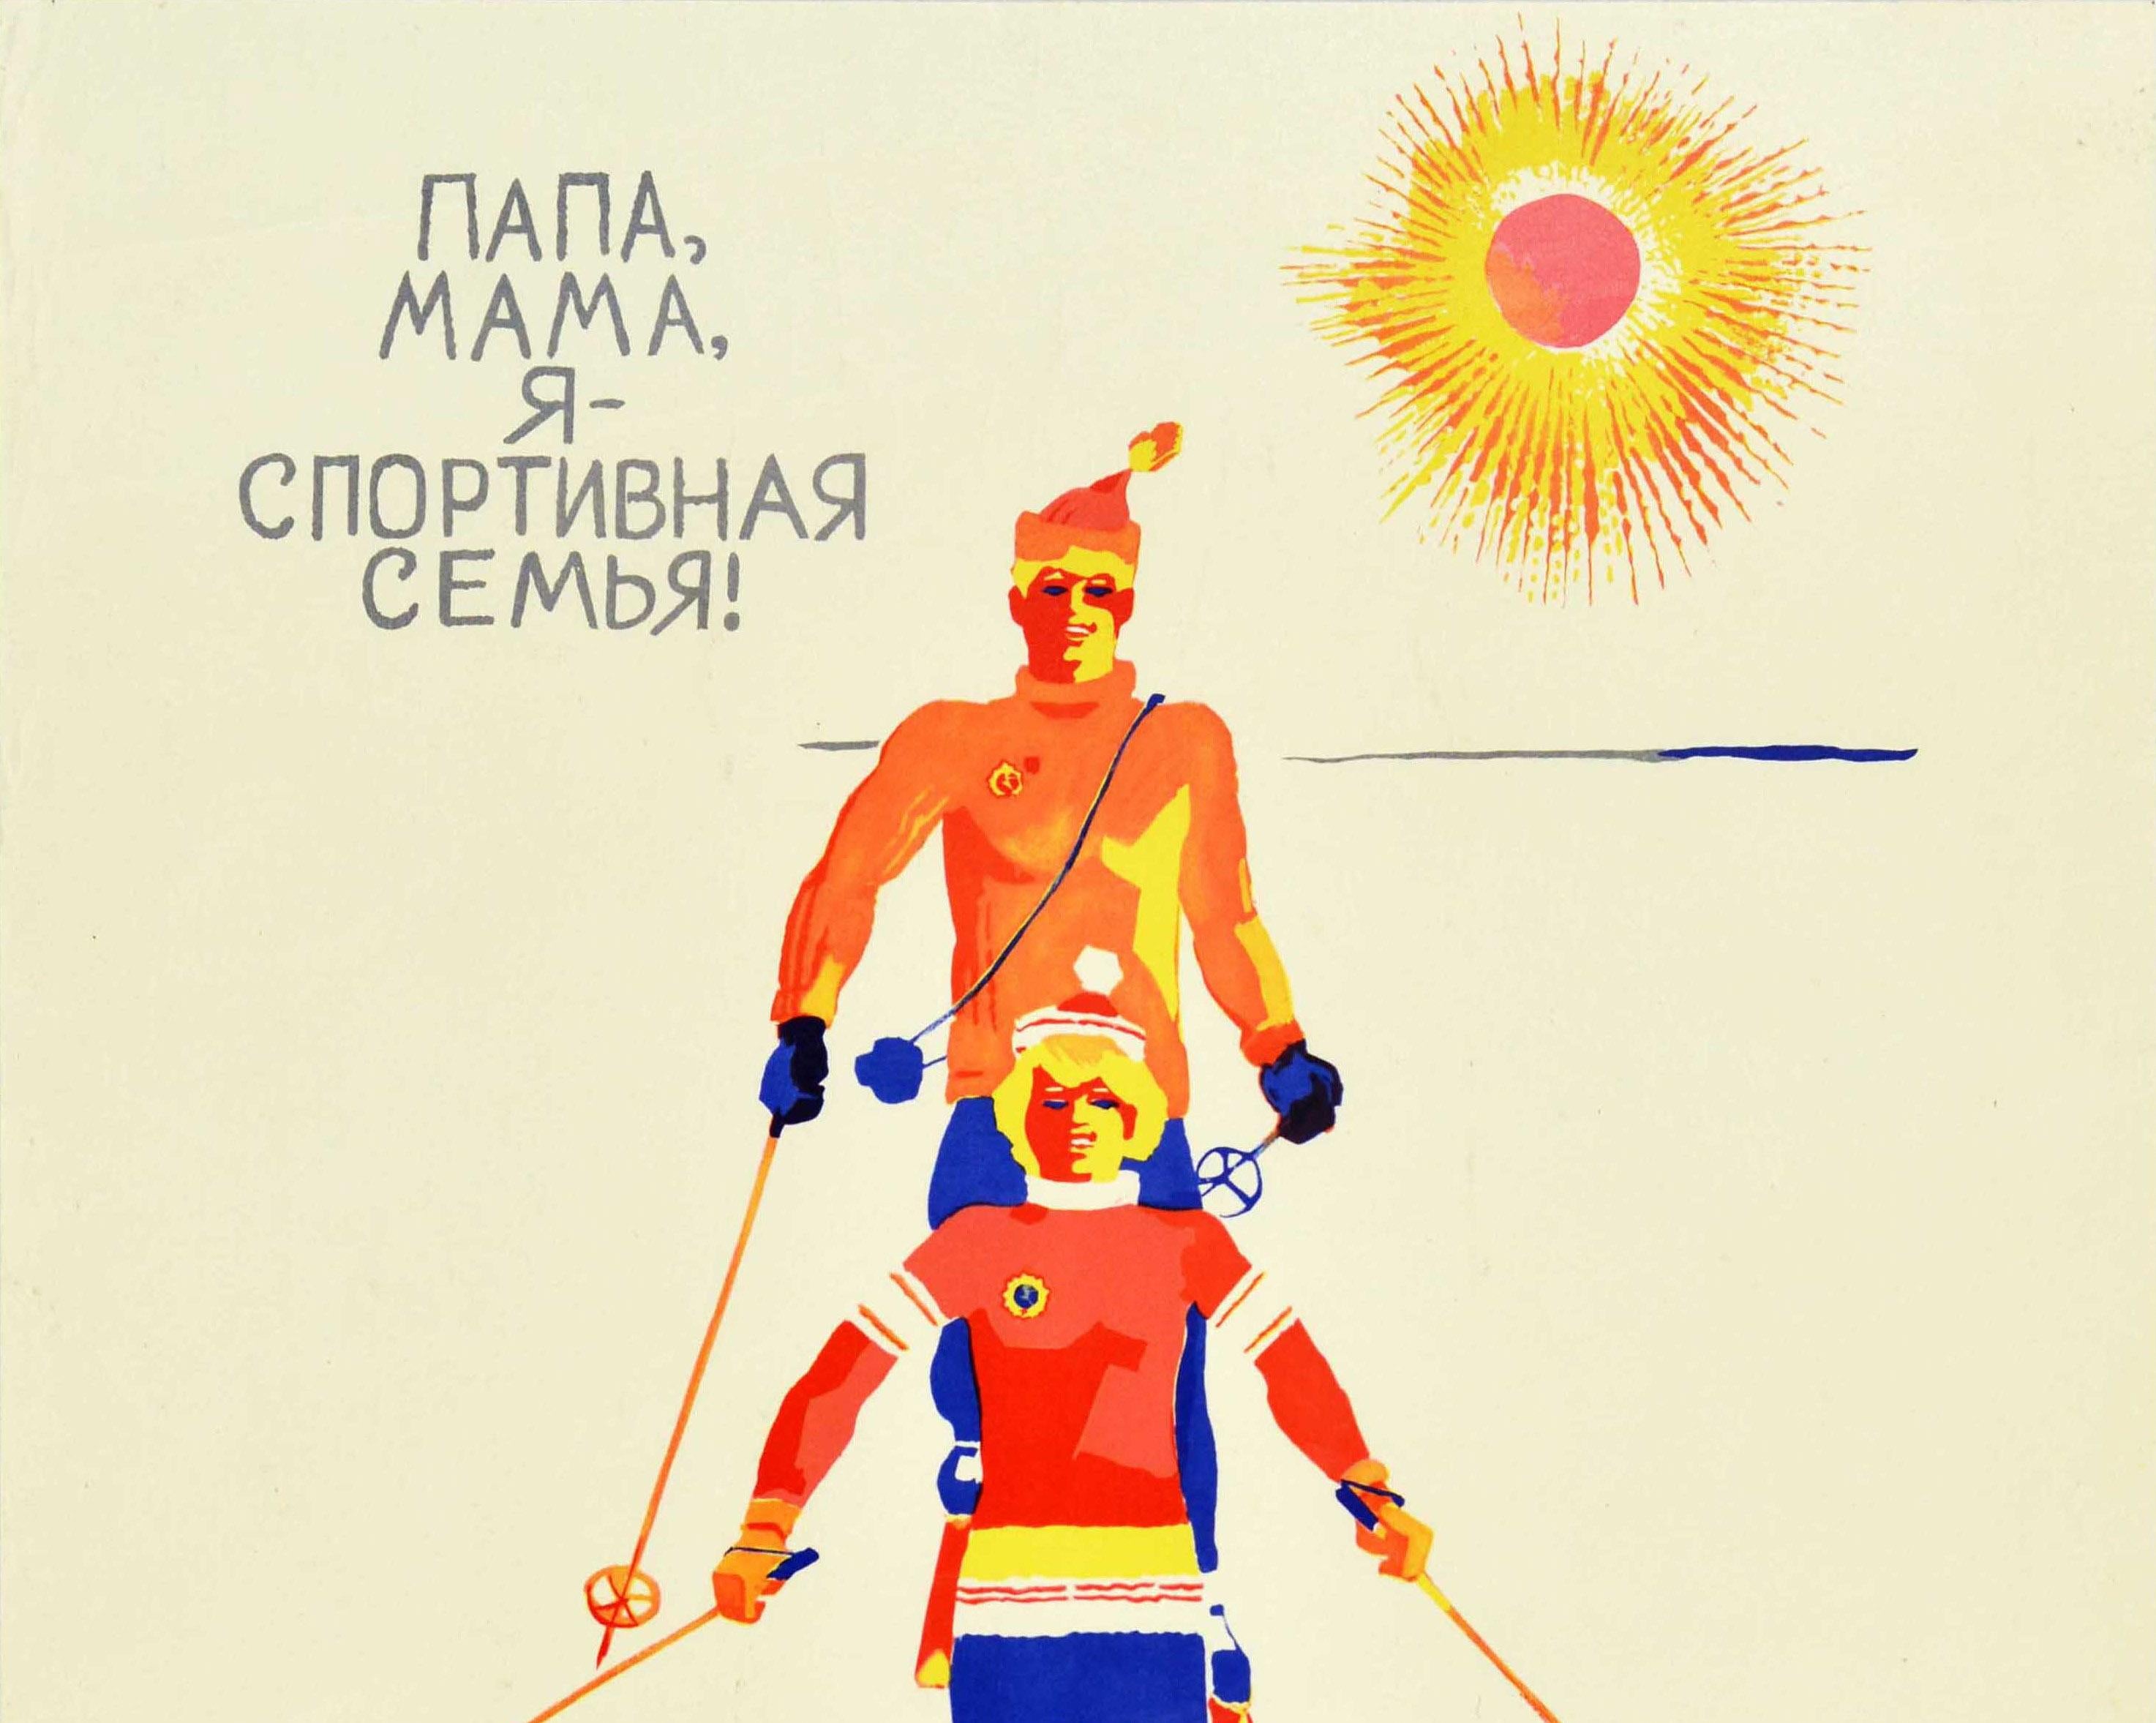 Original vintage Soviet sport poster featuring a fun and colourful illustration of a family on skis smiling and skiing towards the viewer in a line with a child at the front and mother and father behind, a bright sun shining in the sky in the